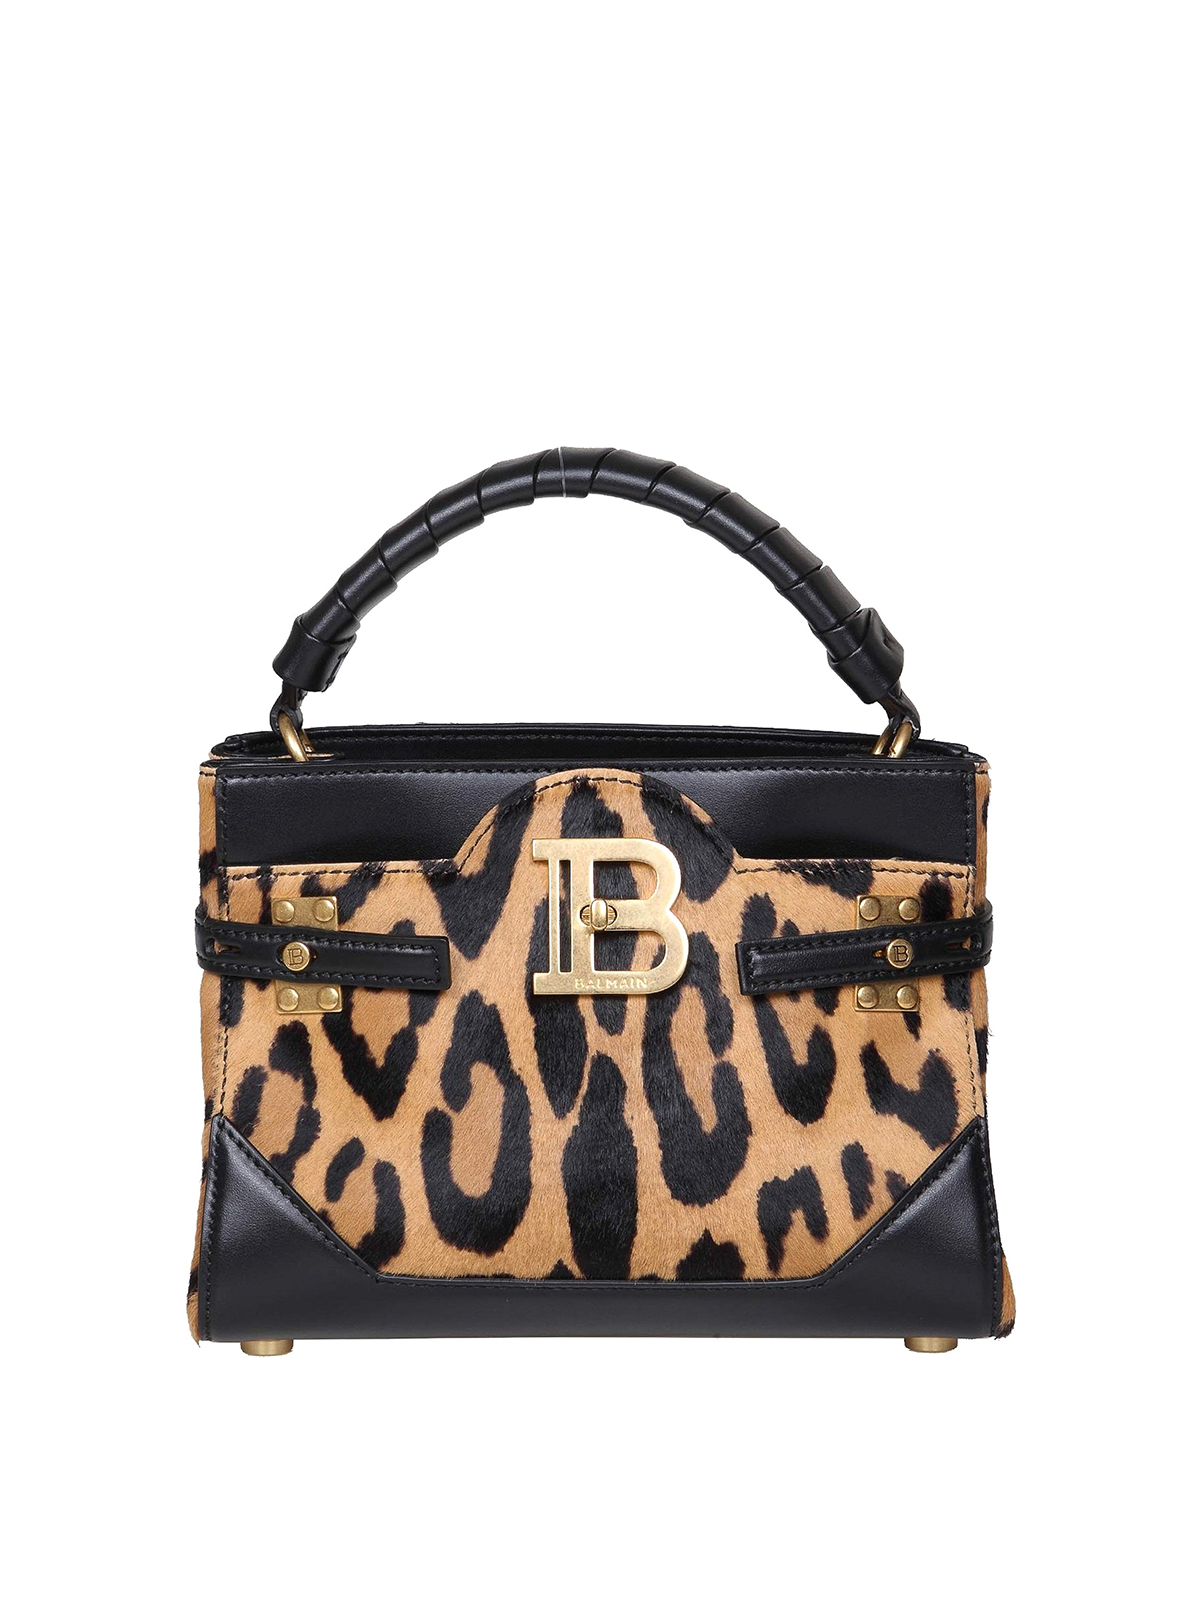 Balmain B-buzz Small Leather Bag With Shoulder Strap In Animal Print